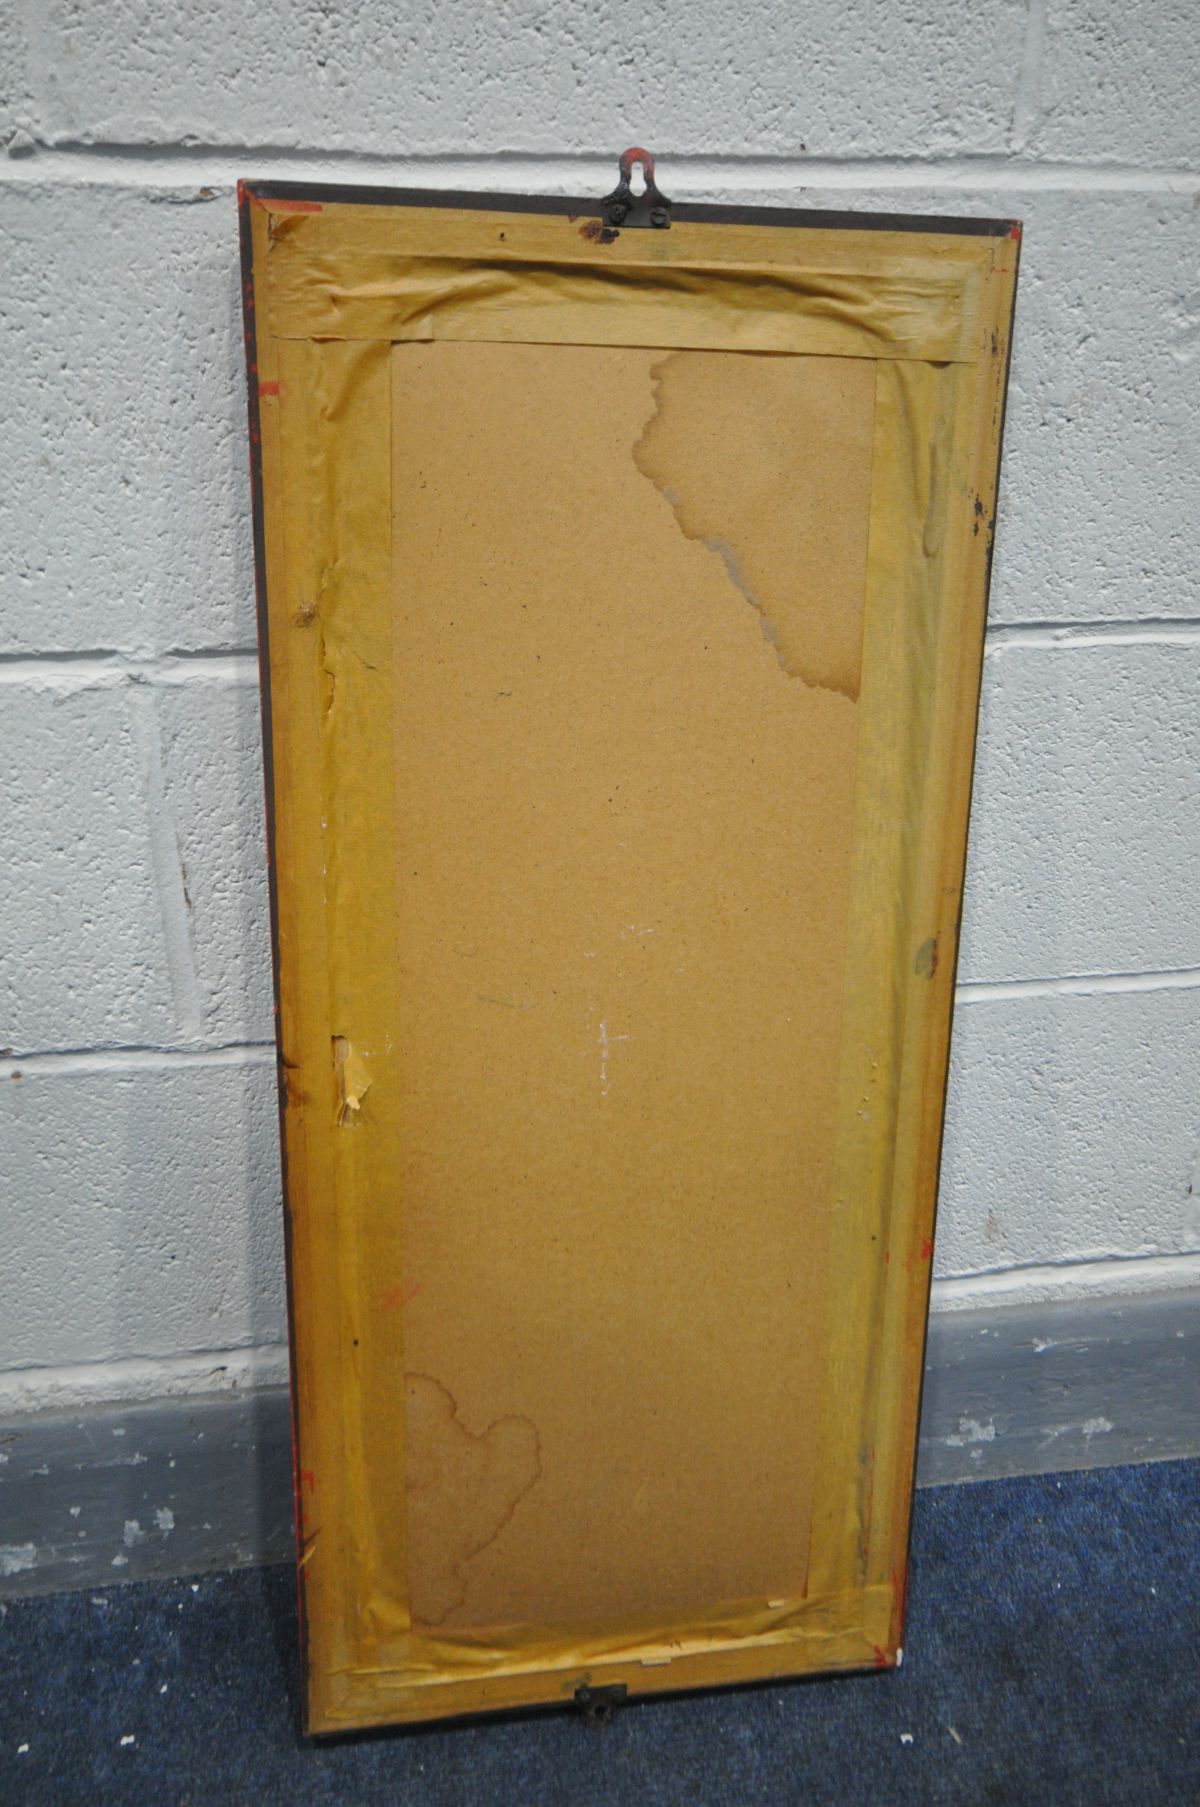 A BASS ADVERTISING MIRROR, length 82cm x height 37cm - Image 2 of 2